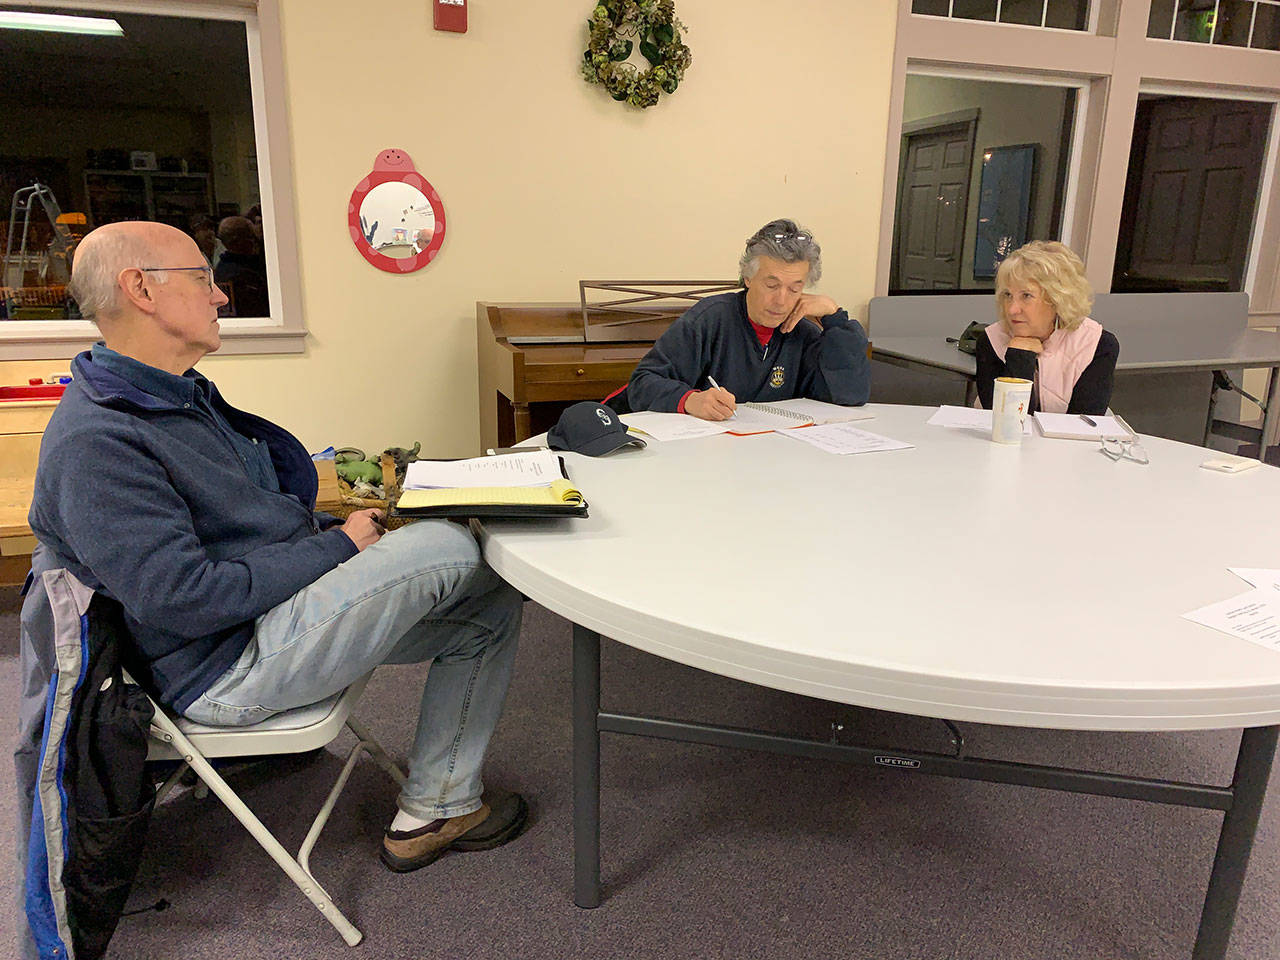 Vashon Health Care District commissioners Eric Pryne, Don Wolczko and LeeAnn Brown met Wednesday, Jan. 22, at the Vashon Presbyterian Church. (Kevin Opsahl/Staff Photo)